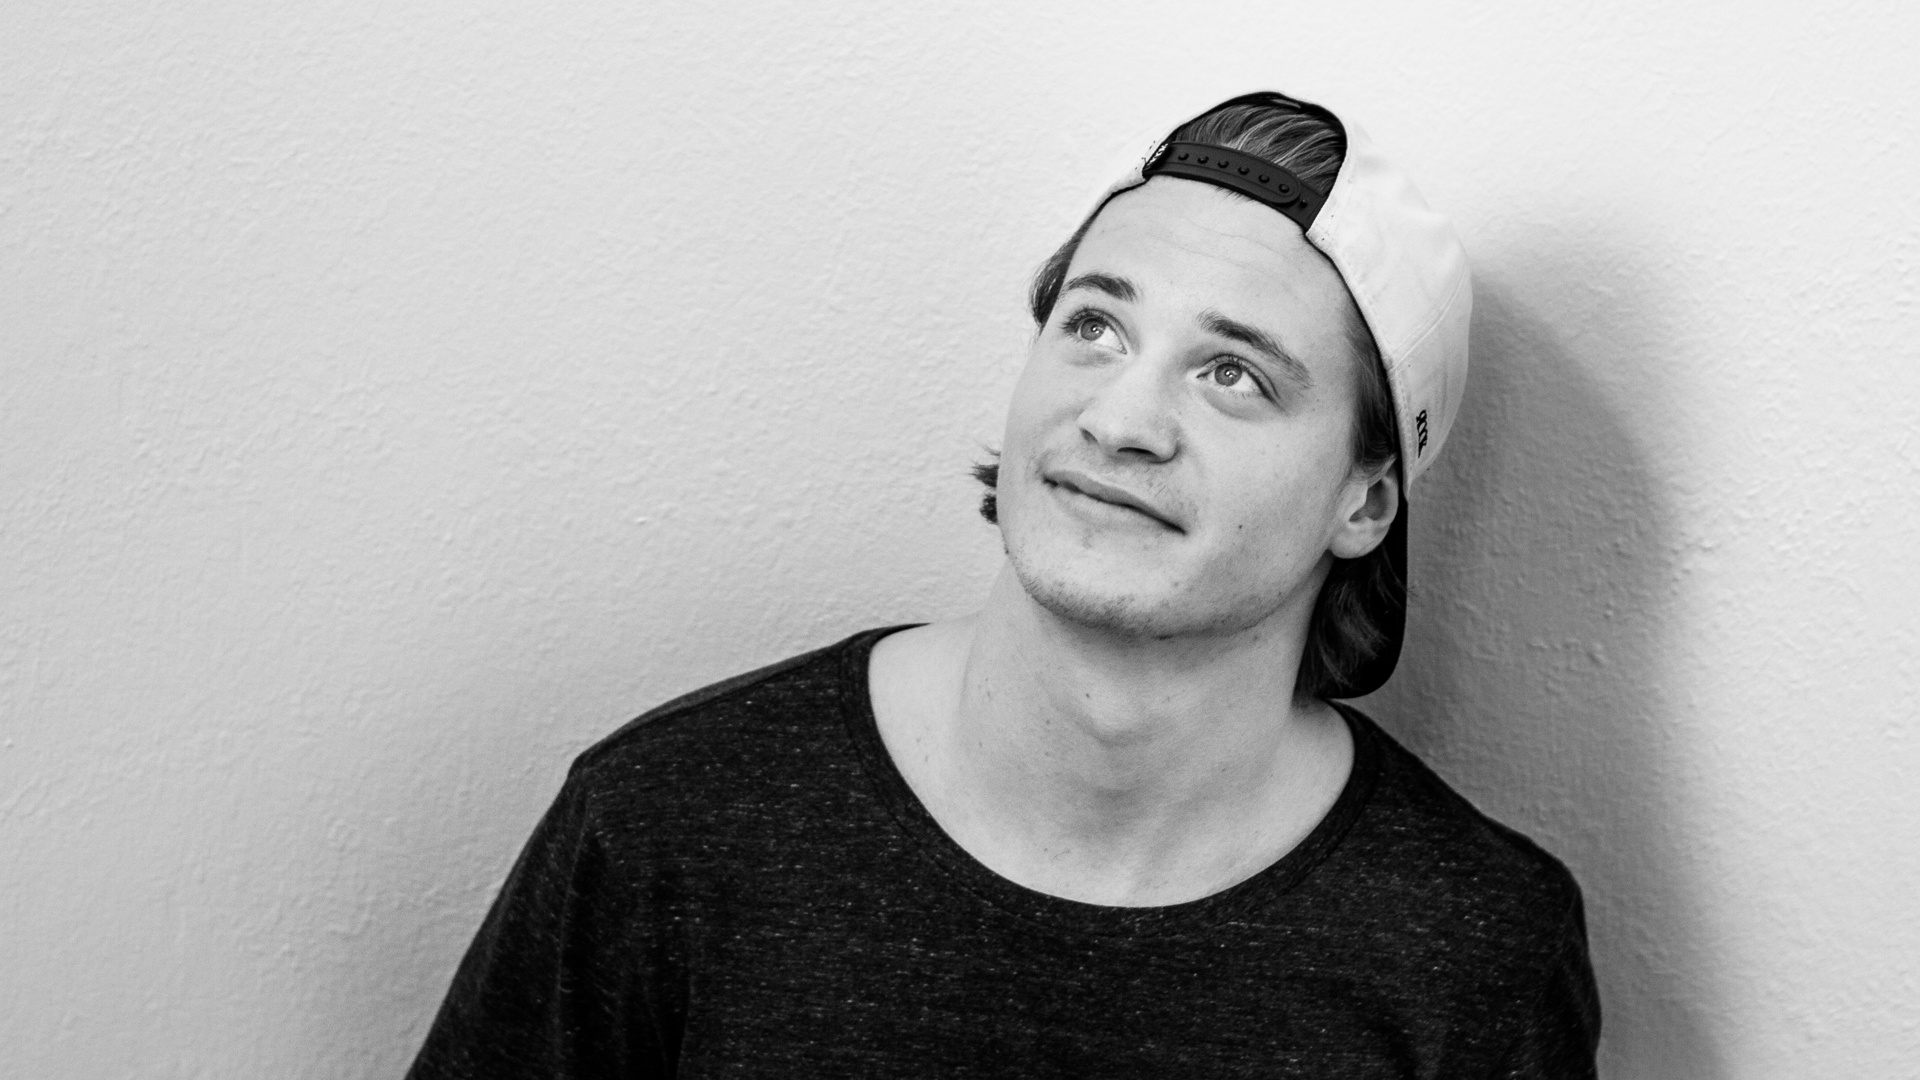 Kygo's best moments, Celebration of his birthday, Year in review, Unforgettable memories, 1920x1080 Full HD Desktop